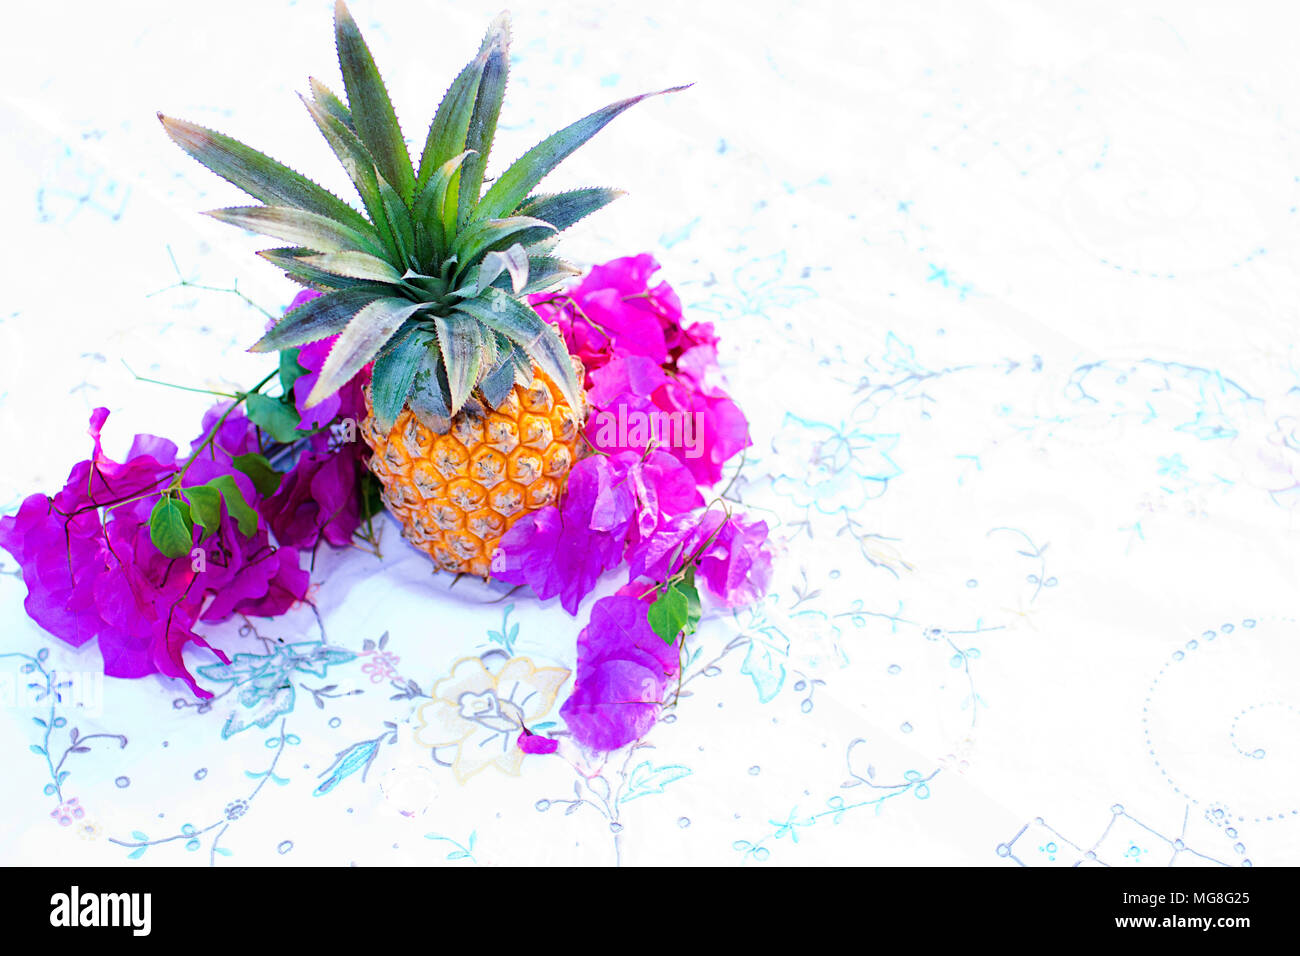 Pineapple and bougainvillea flowers Stock Photo